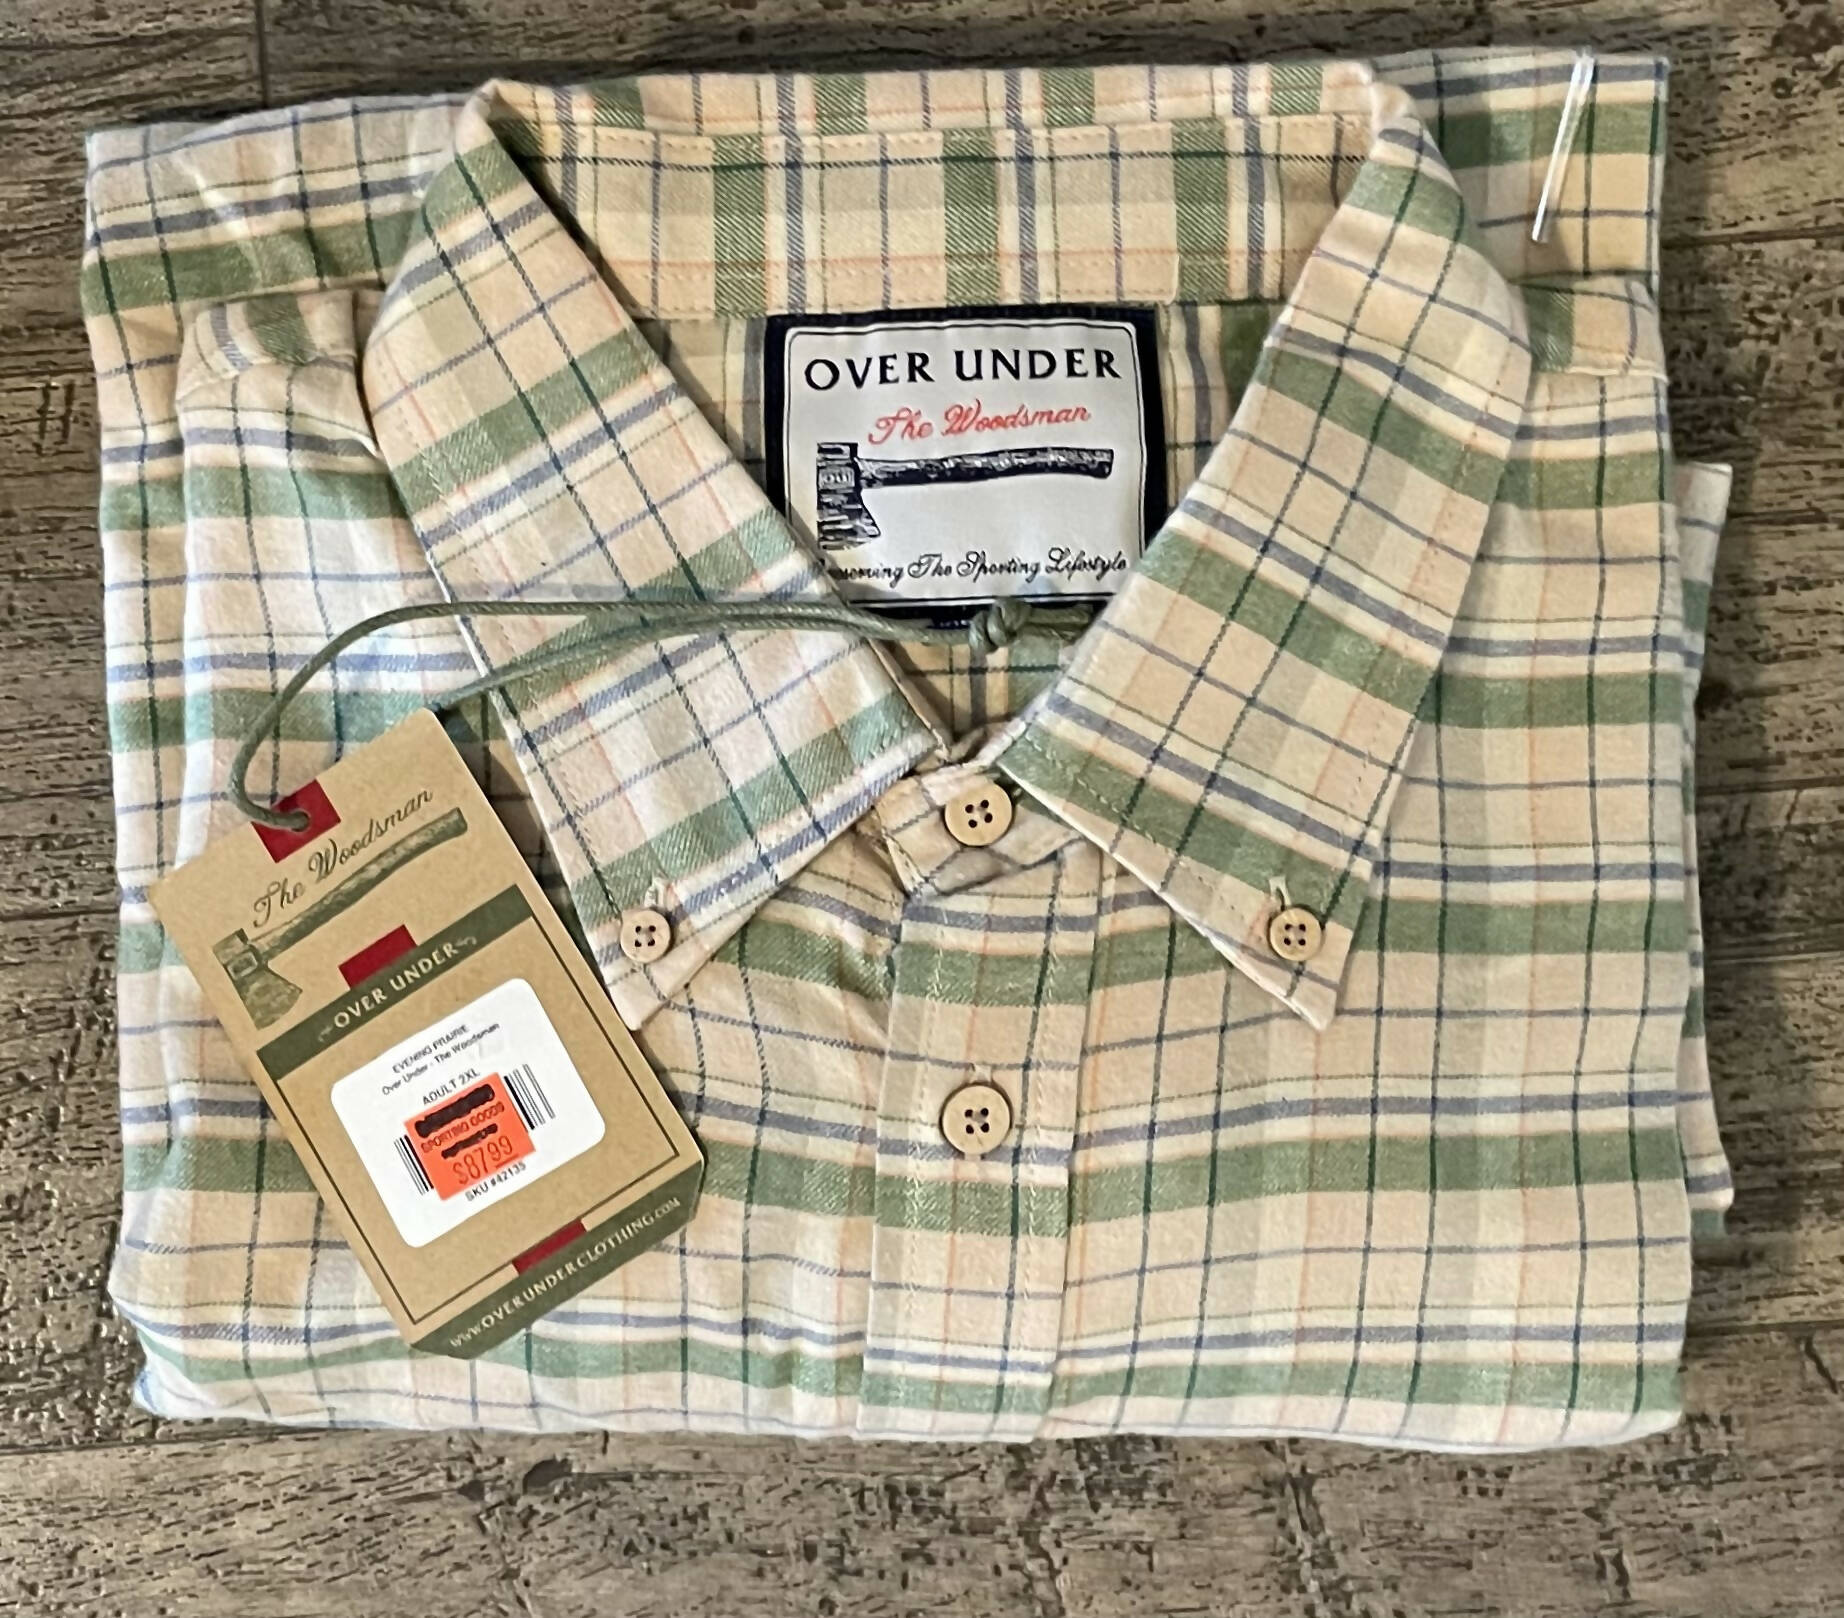 OVER UNDER Woodsman Flannel Shirt - Evening Prairie NEW WITH TAGS